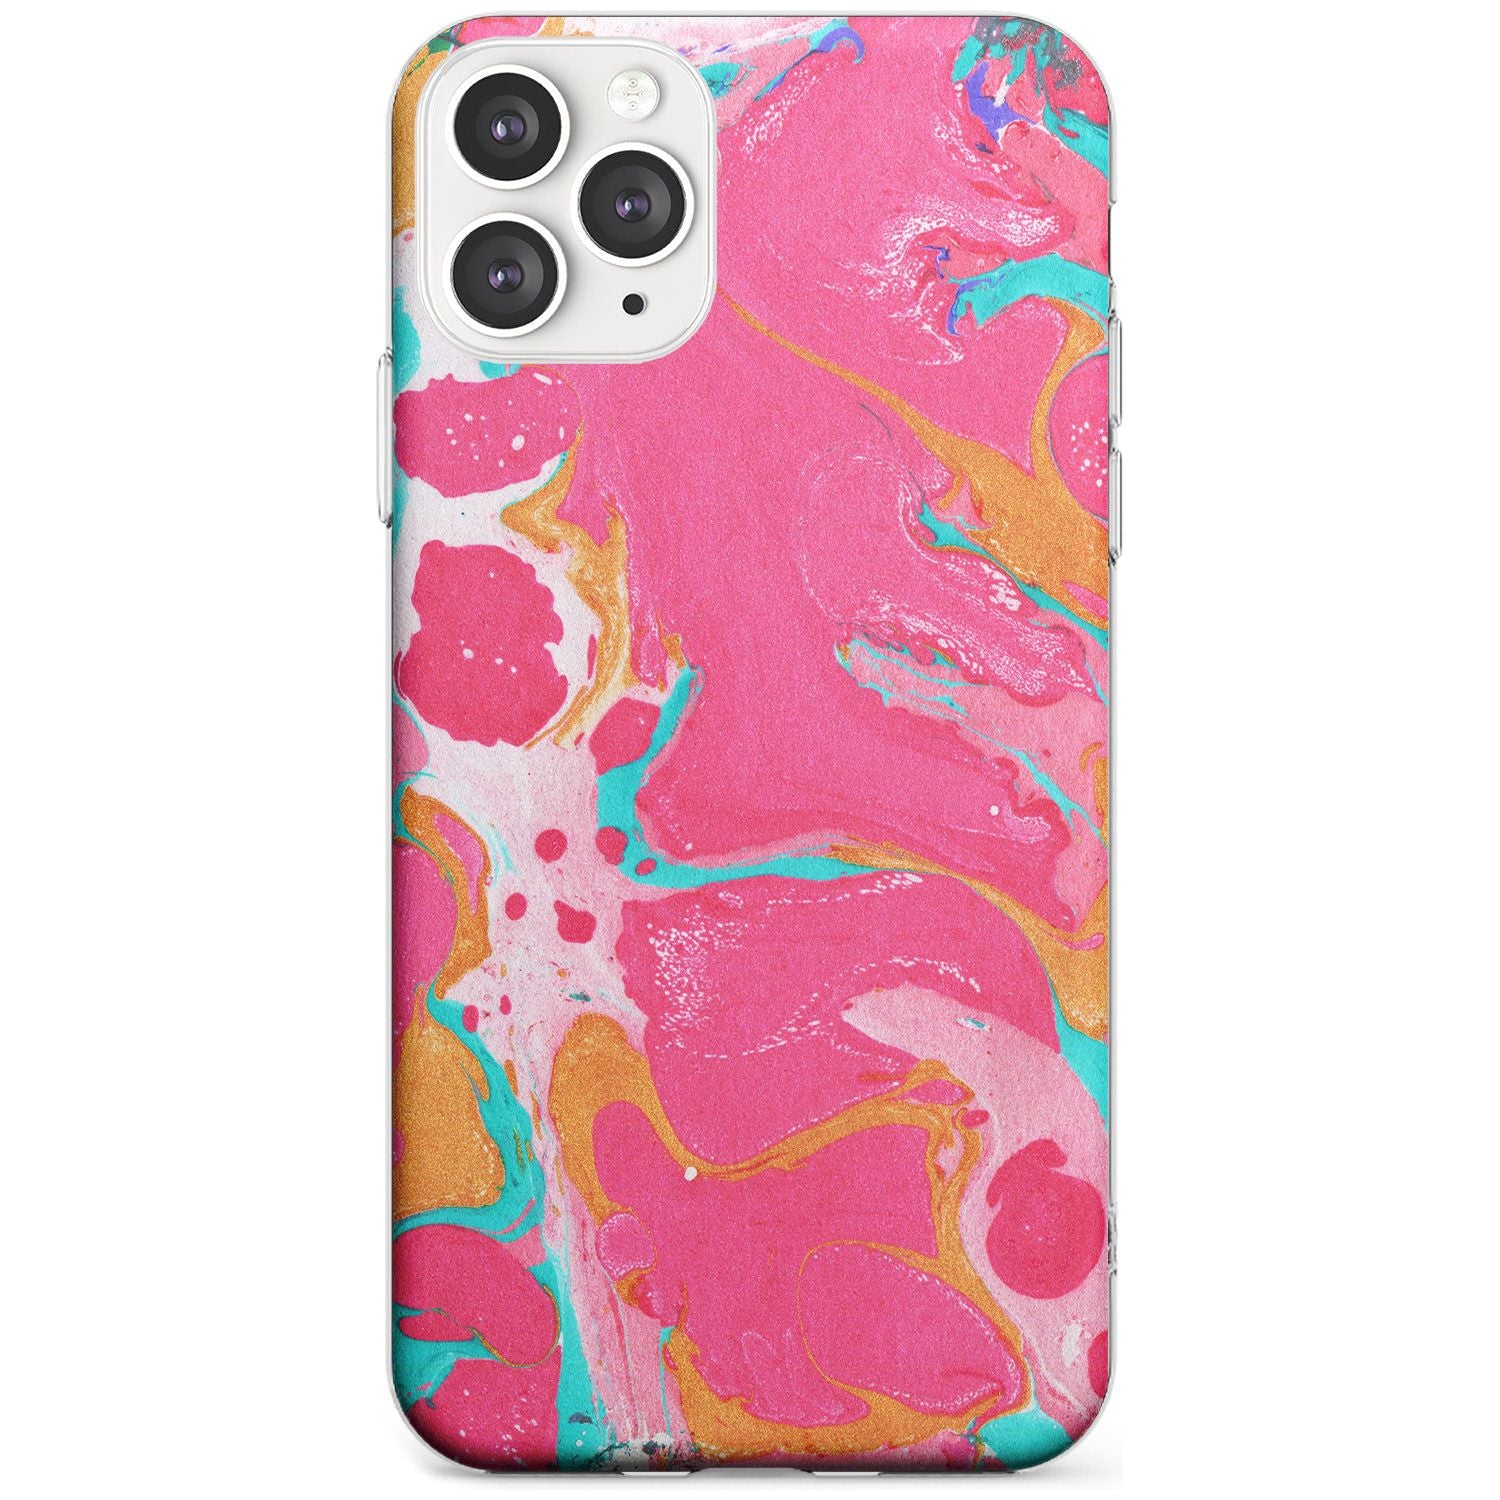 Pink, Orange & Turquoise Marbled Paper Pattern Slim TPU Phone Case for iPhone 11 Pro Max